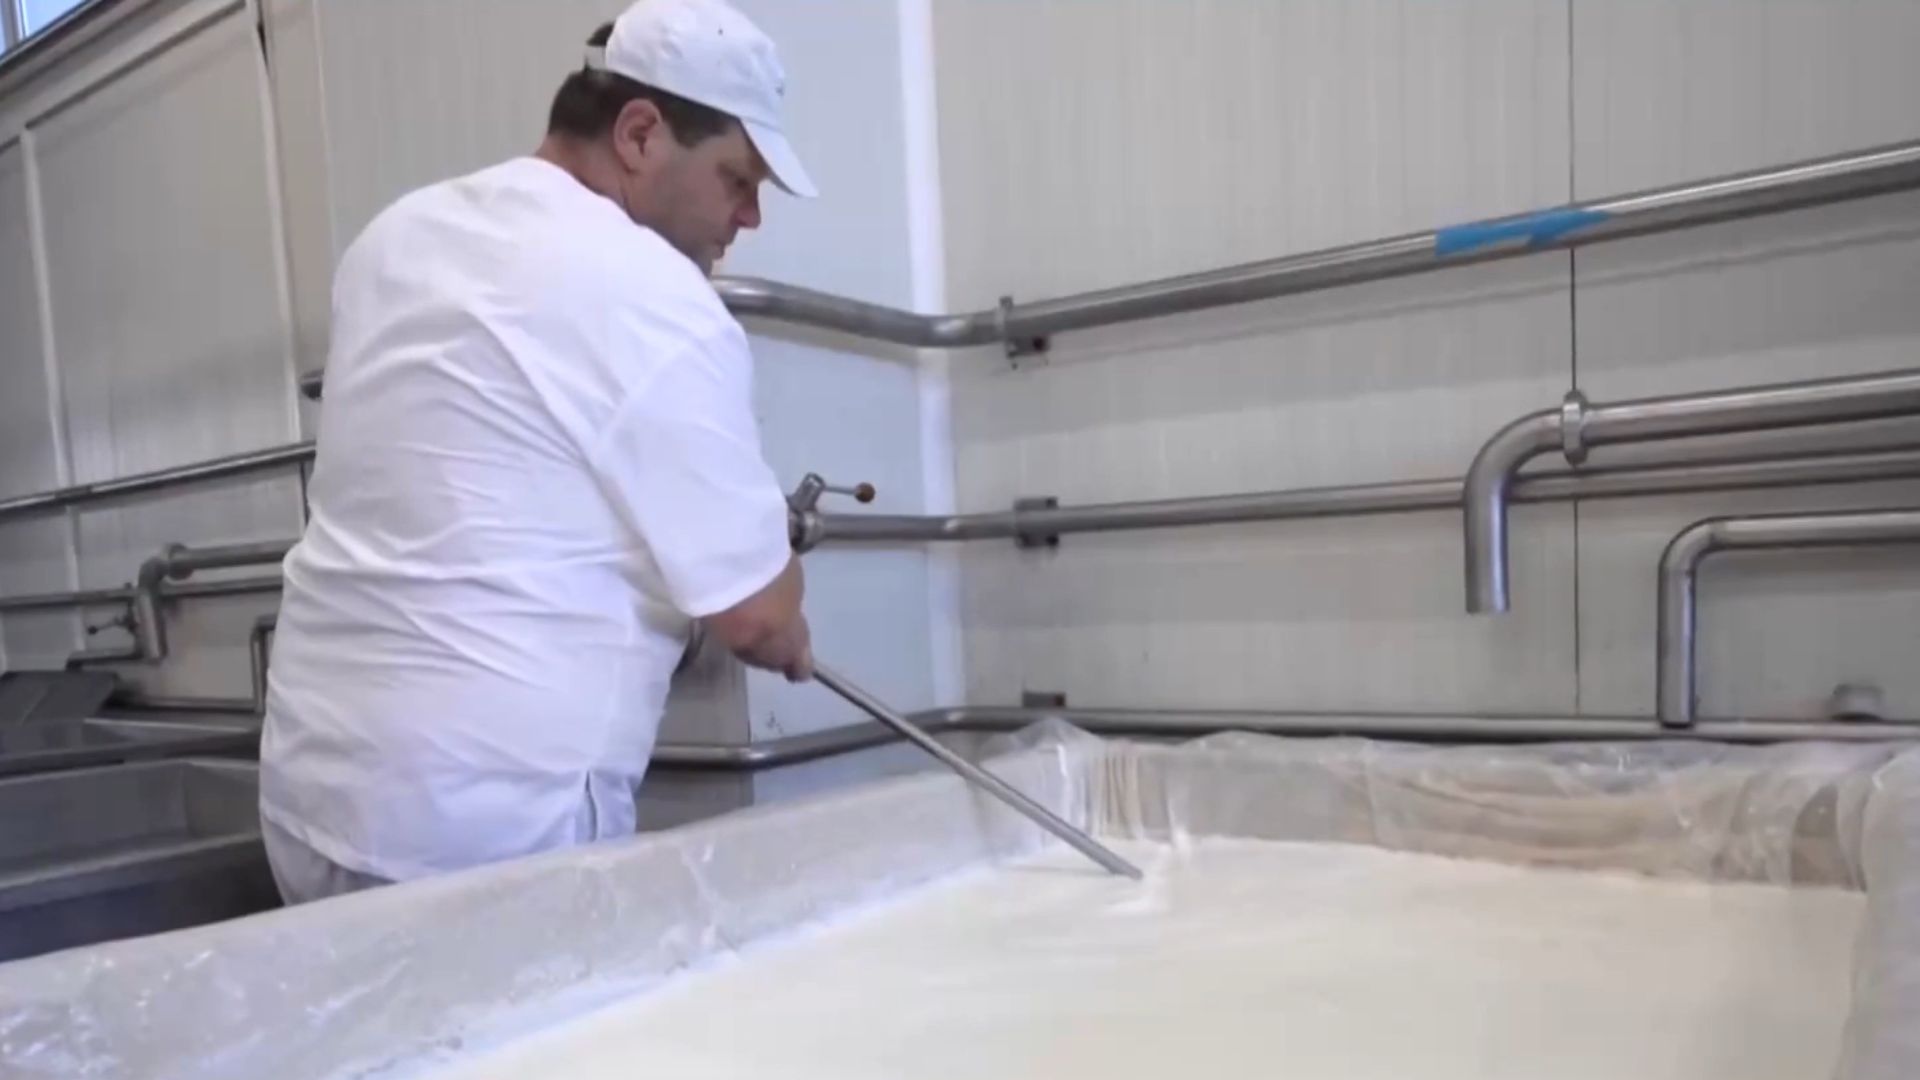 25 Parshevitsa employees produce 700 tons of dairy products every month./CGTN